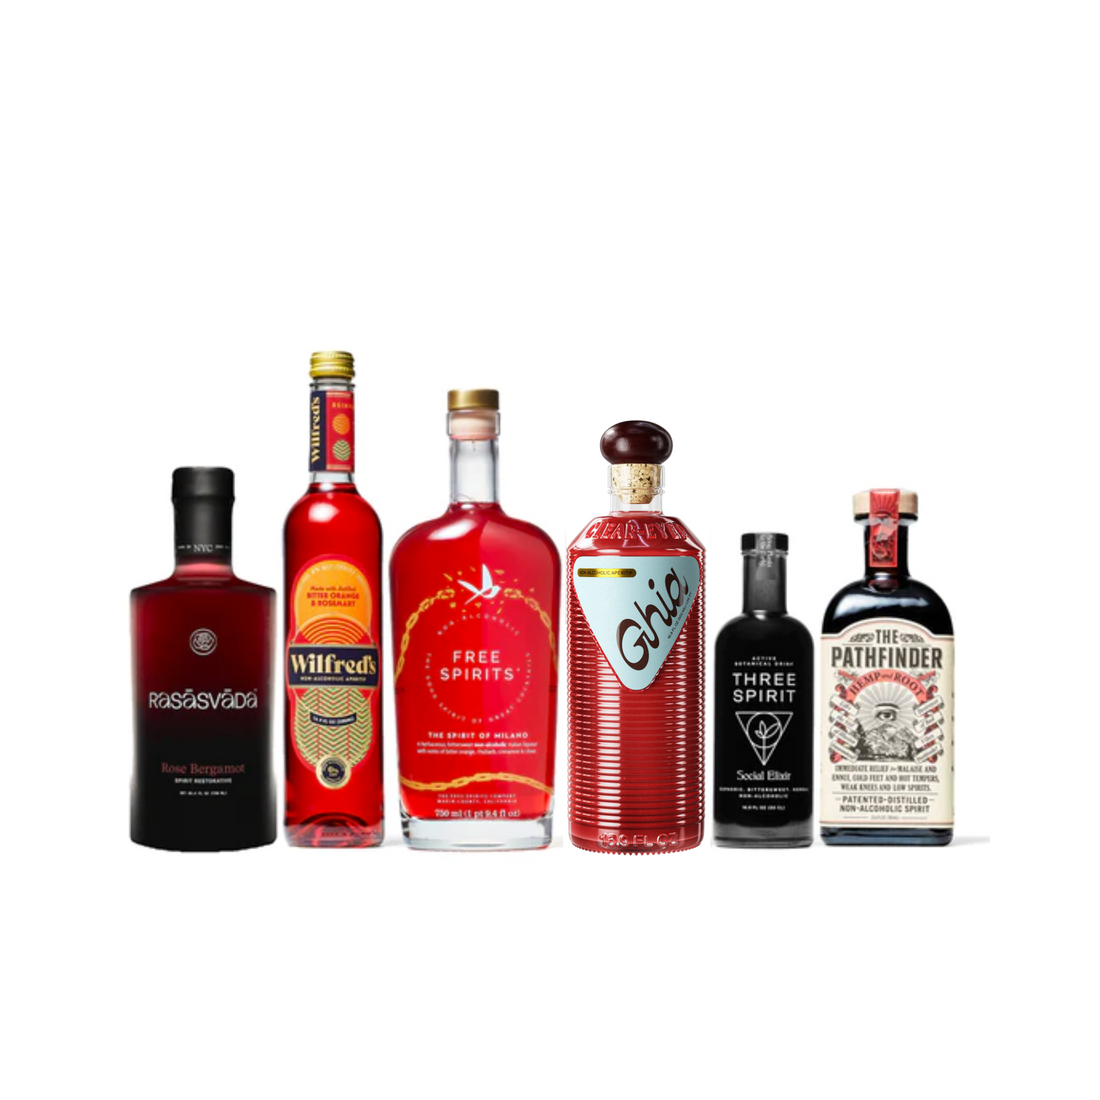 Apéritif Tasting Set Bundle - Boisson — Brooklyn's Non-Alcoholic Spirits, Beer, Wine, and Home Bar Shop in Cobble Hill